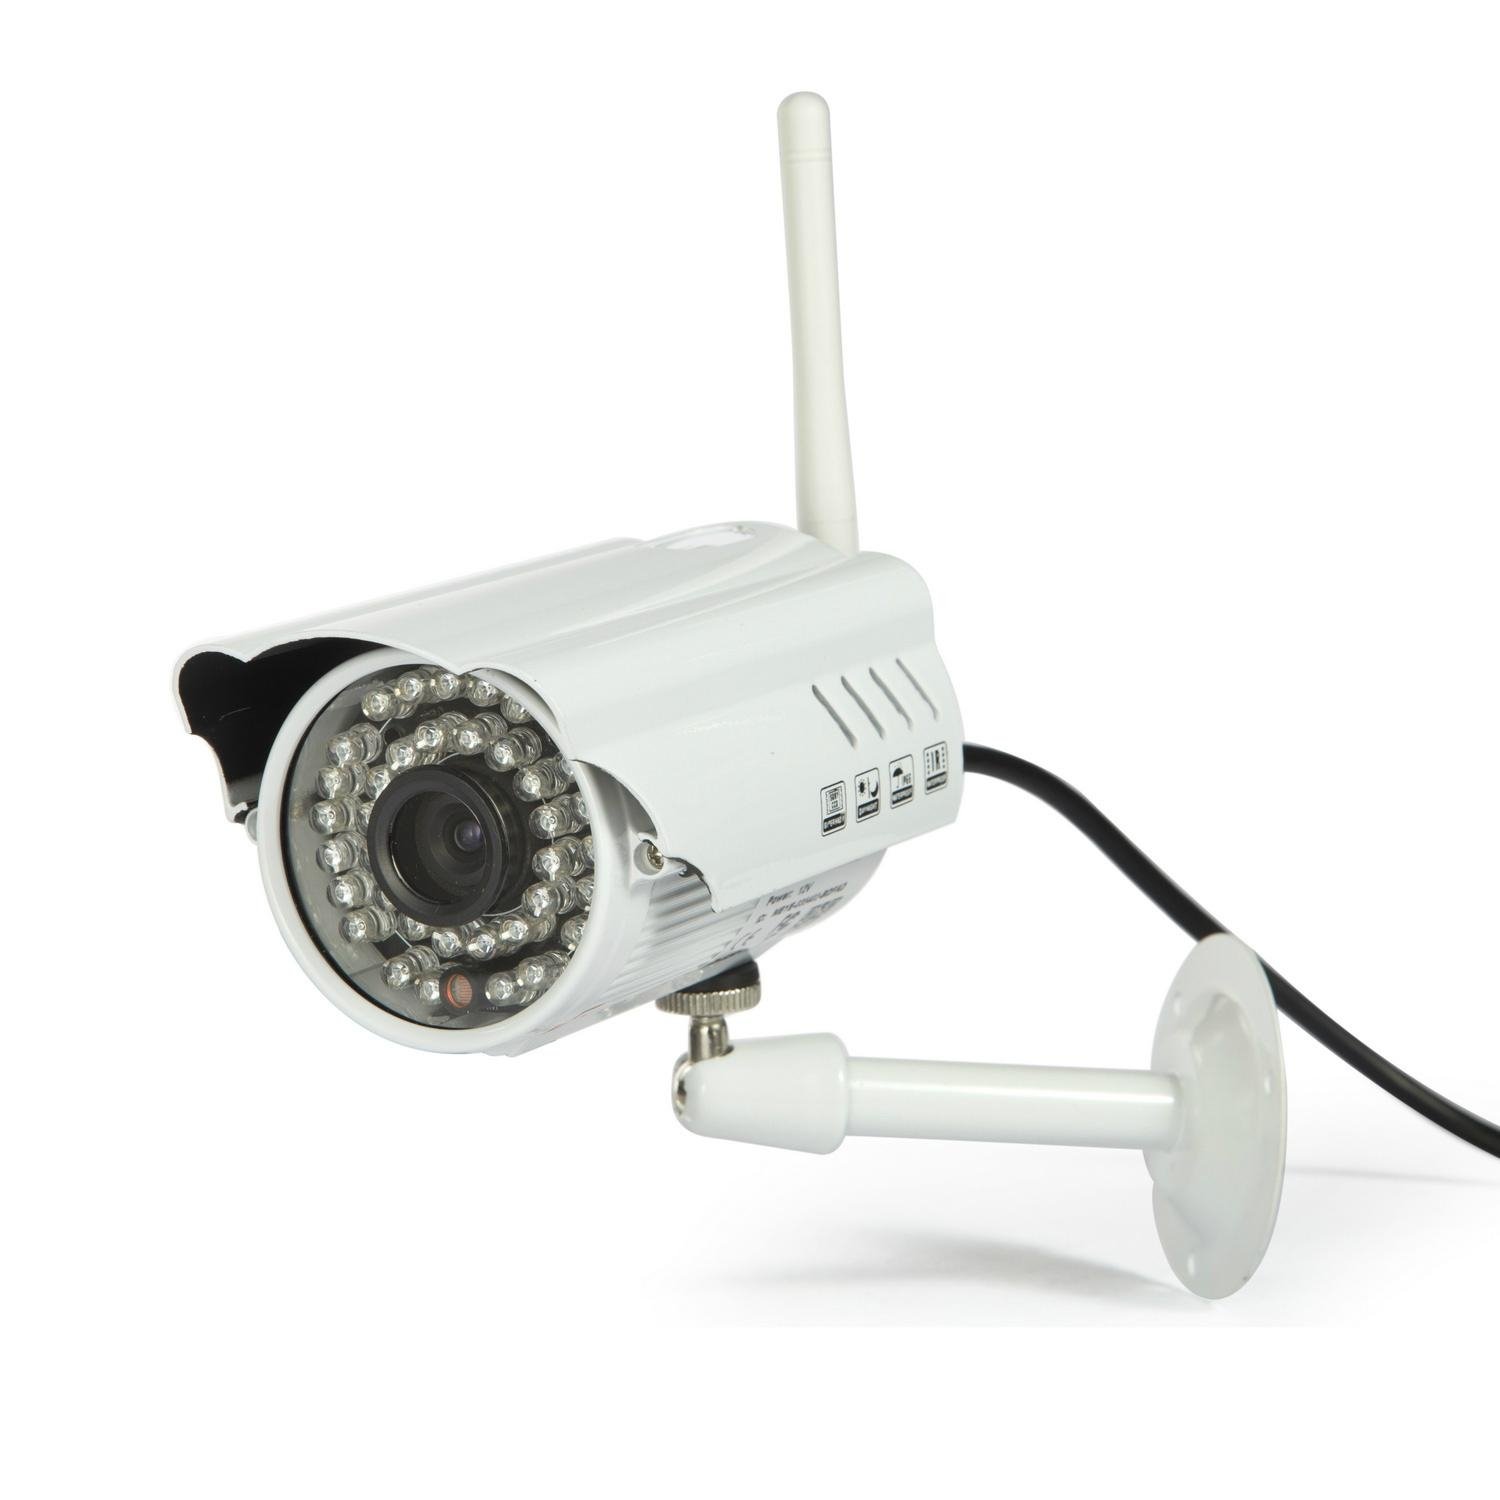 Alytimes Aly009 ir cut sd card outdoor hd security camera ip 3